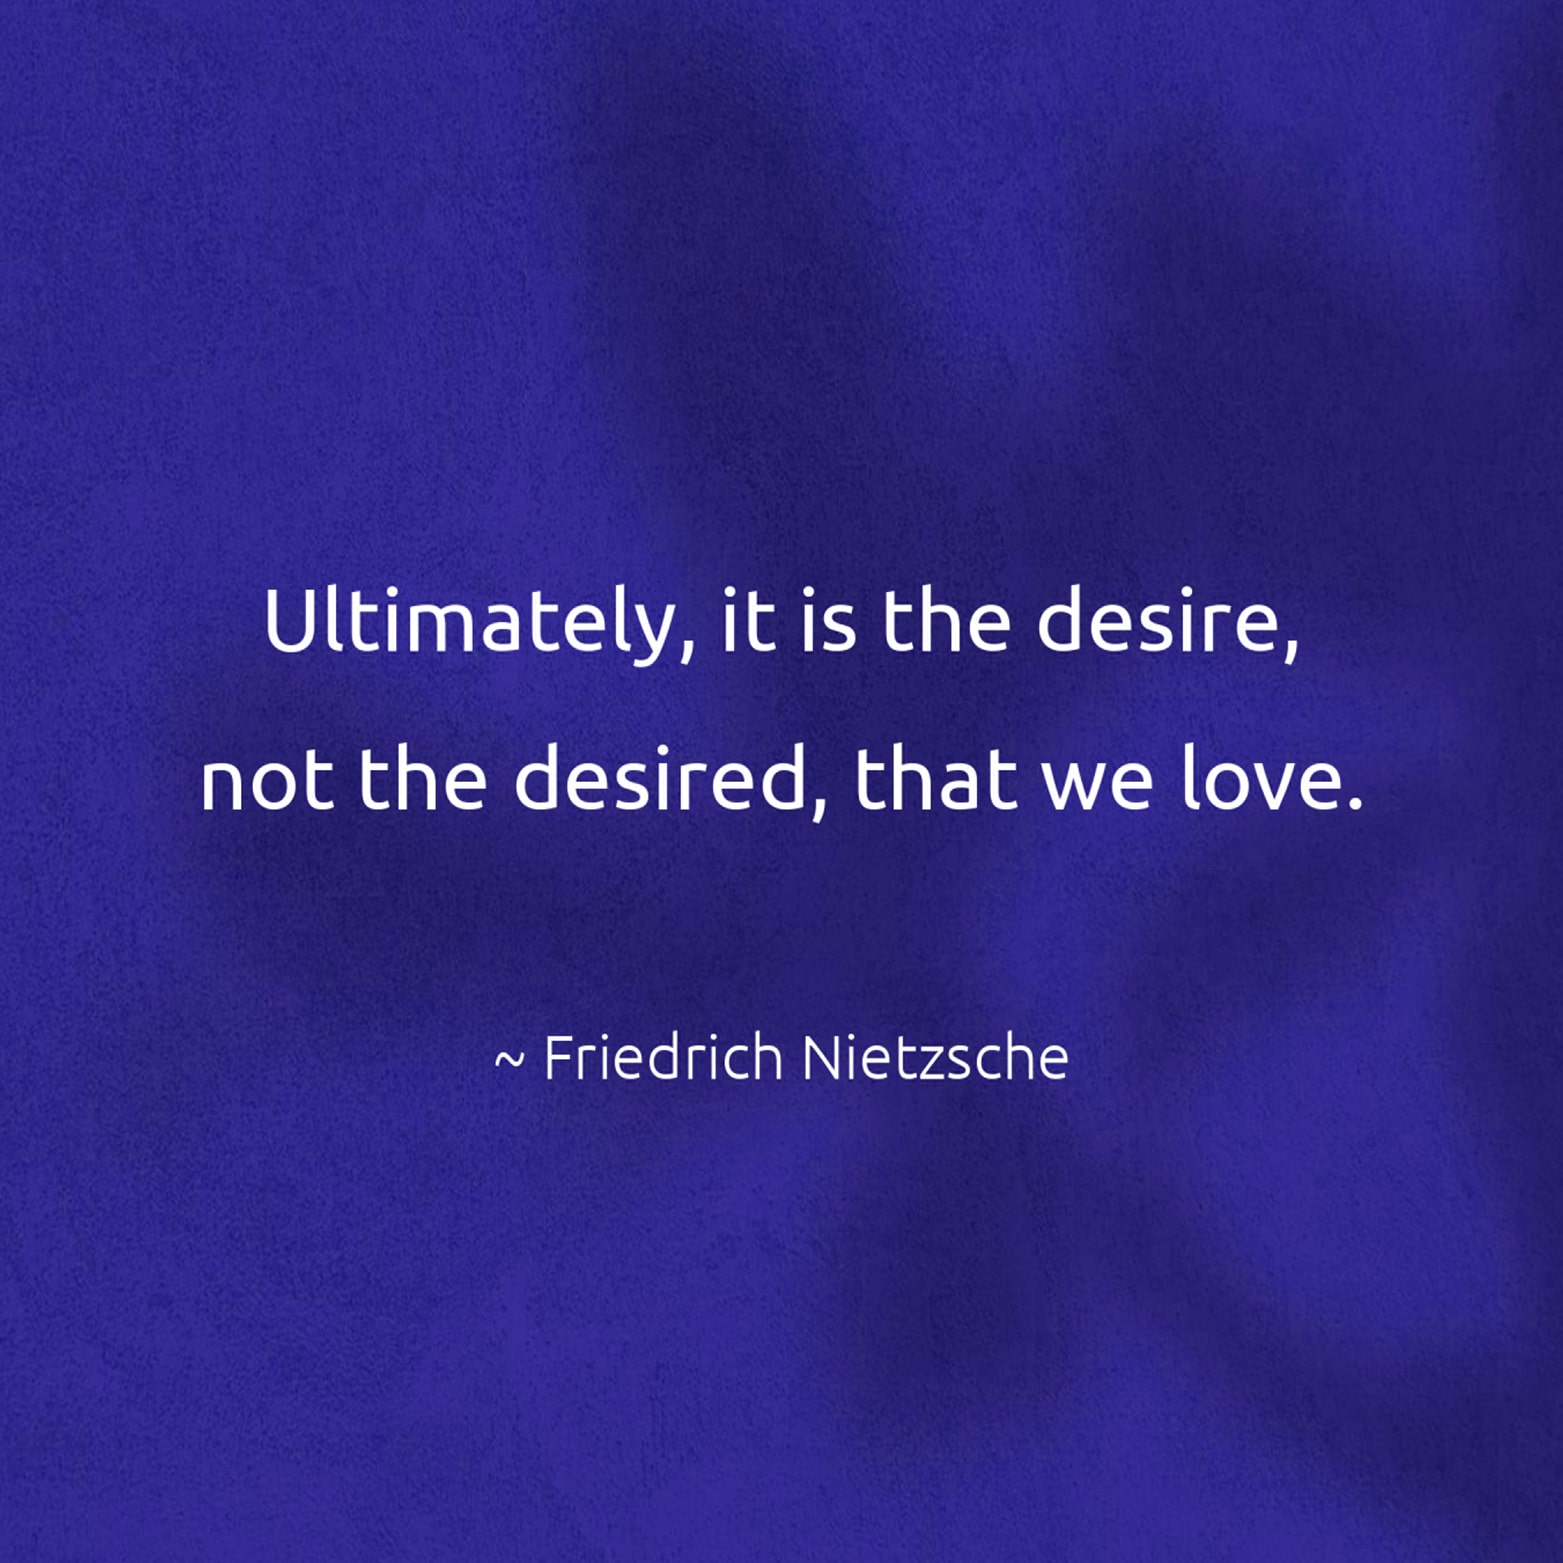 Ultimately, it is the desire, not the desired, that we love. - Friedrich Nietzsche